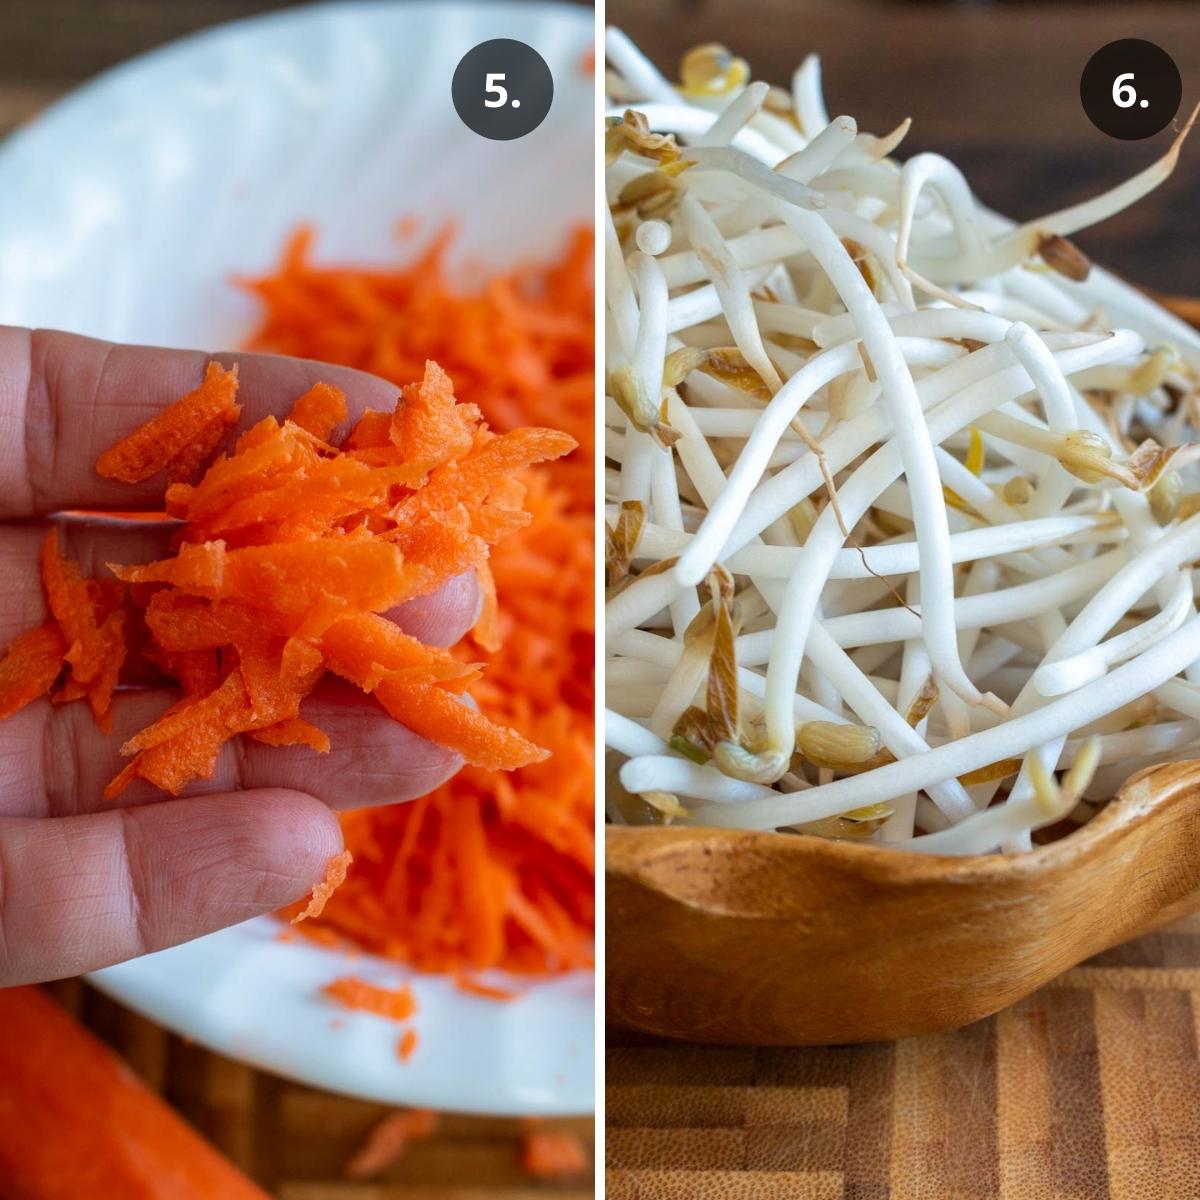 Grating carrot and slicing bean sprouts.